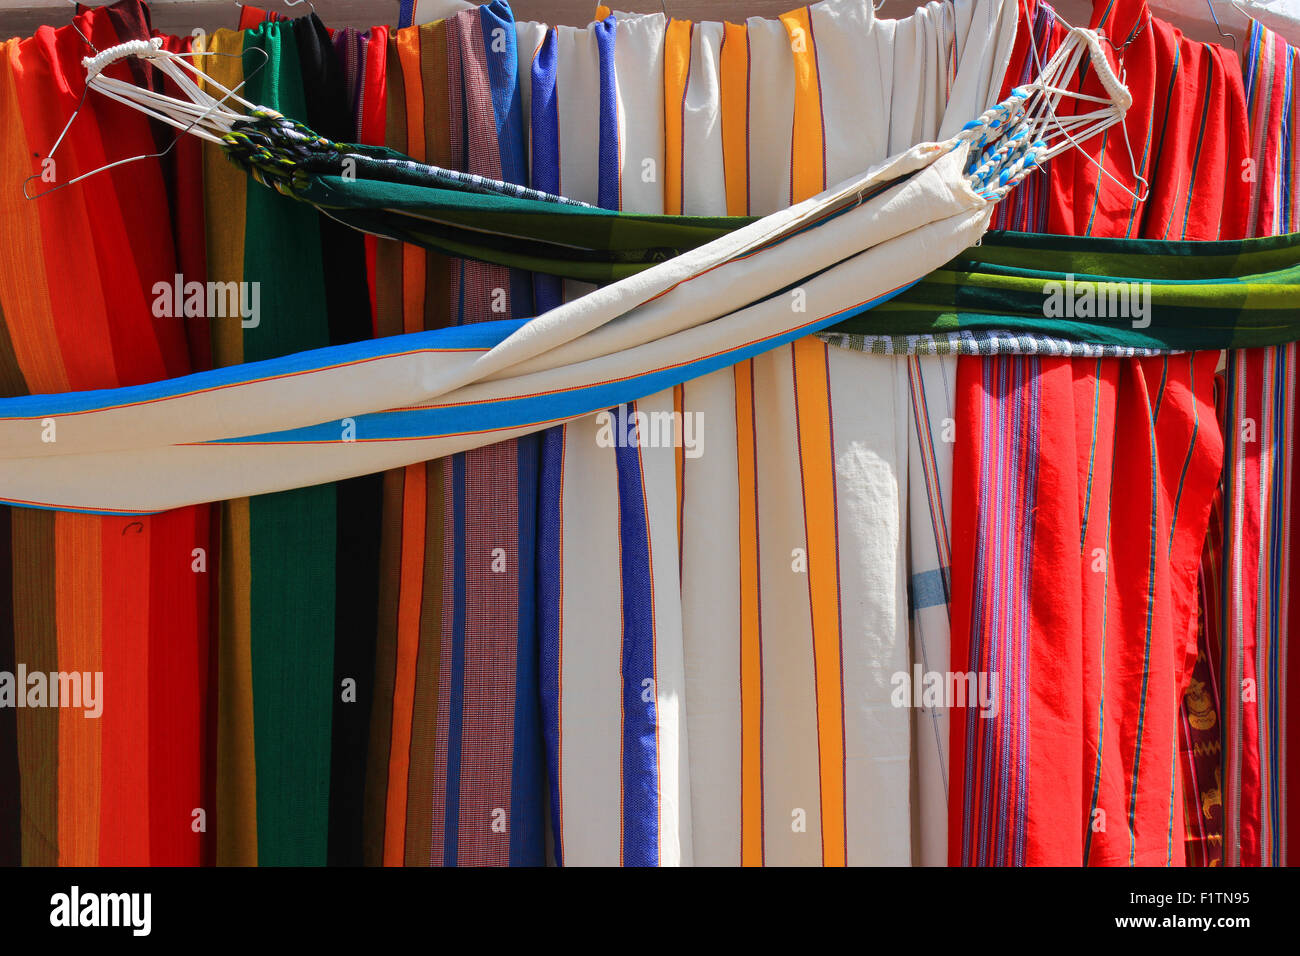 Handmade hammocks in a variety of patterns and colors for sale at the outdoor craft market in Otavalo, Ecuador Stock Photo